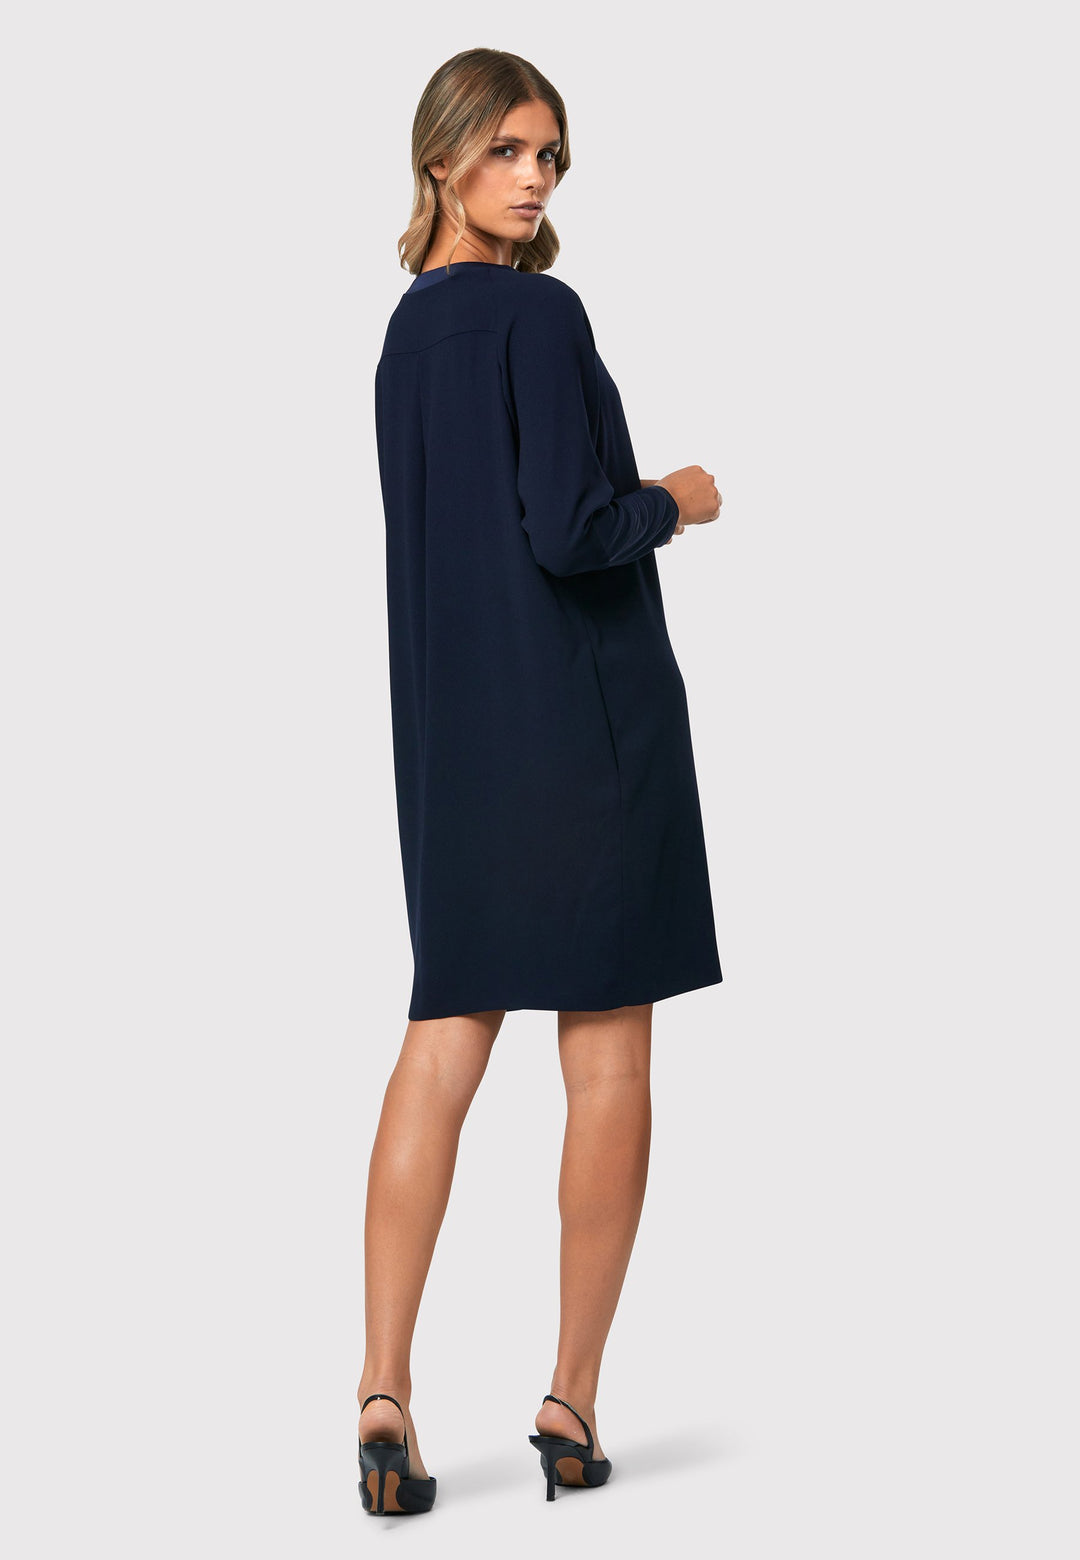  Adelaide Midnight Navy Dress, a knee-length ensemble that exudes timeless elegance. This chic dress features a satin cuff detail with an elegant point, adding a sophisticated touch to the design